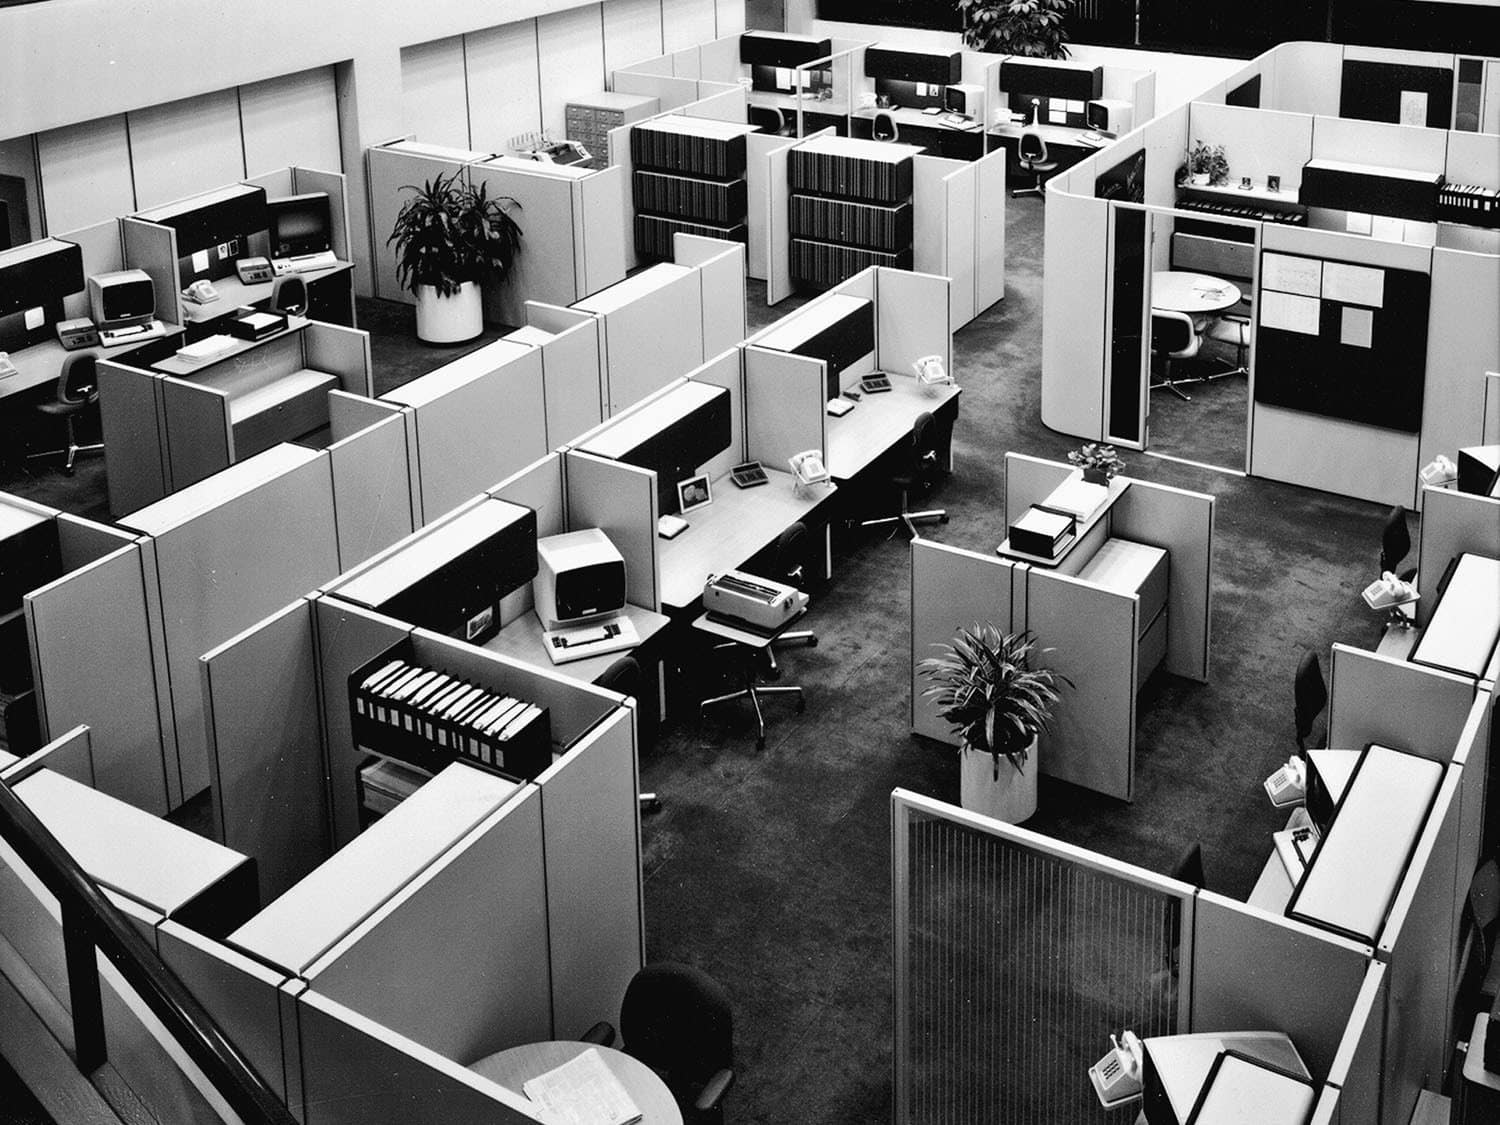 The stereotypical office cube farm environment has been a fertile source of humor, inspiring the Dilbert comic strip, the movie Office Space and both the British and US versions of the television series The Office. But Hermann Miller's 1967 Action Office II by designer Robert Probst was well received as a positive step when it was new. In time however, space planners crammed more and more of the units into offices, as shown in this photo.